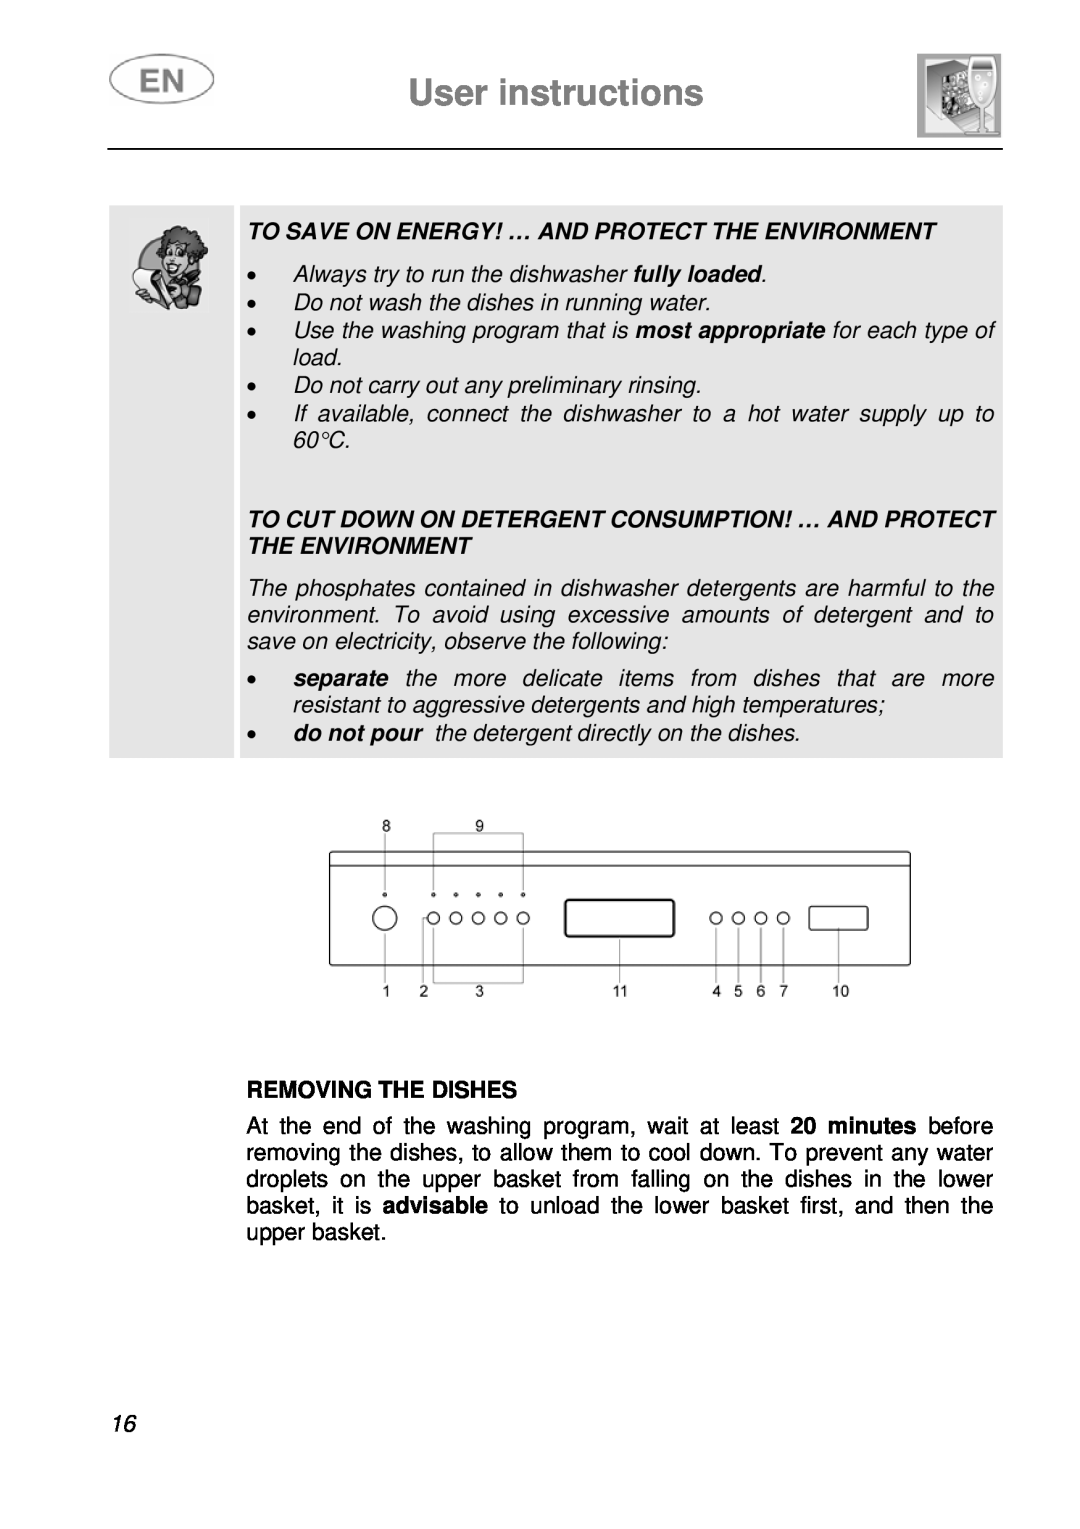 Smeg LSA643XPQ instruction manual User instructions, To Save On Energy! … And Protect The Environment, Removing The Dishes 